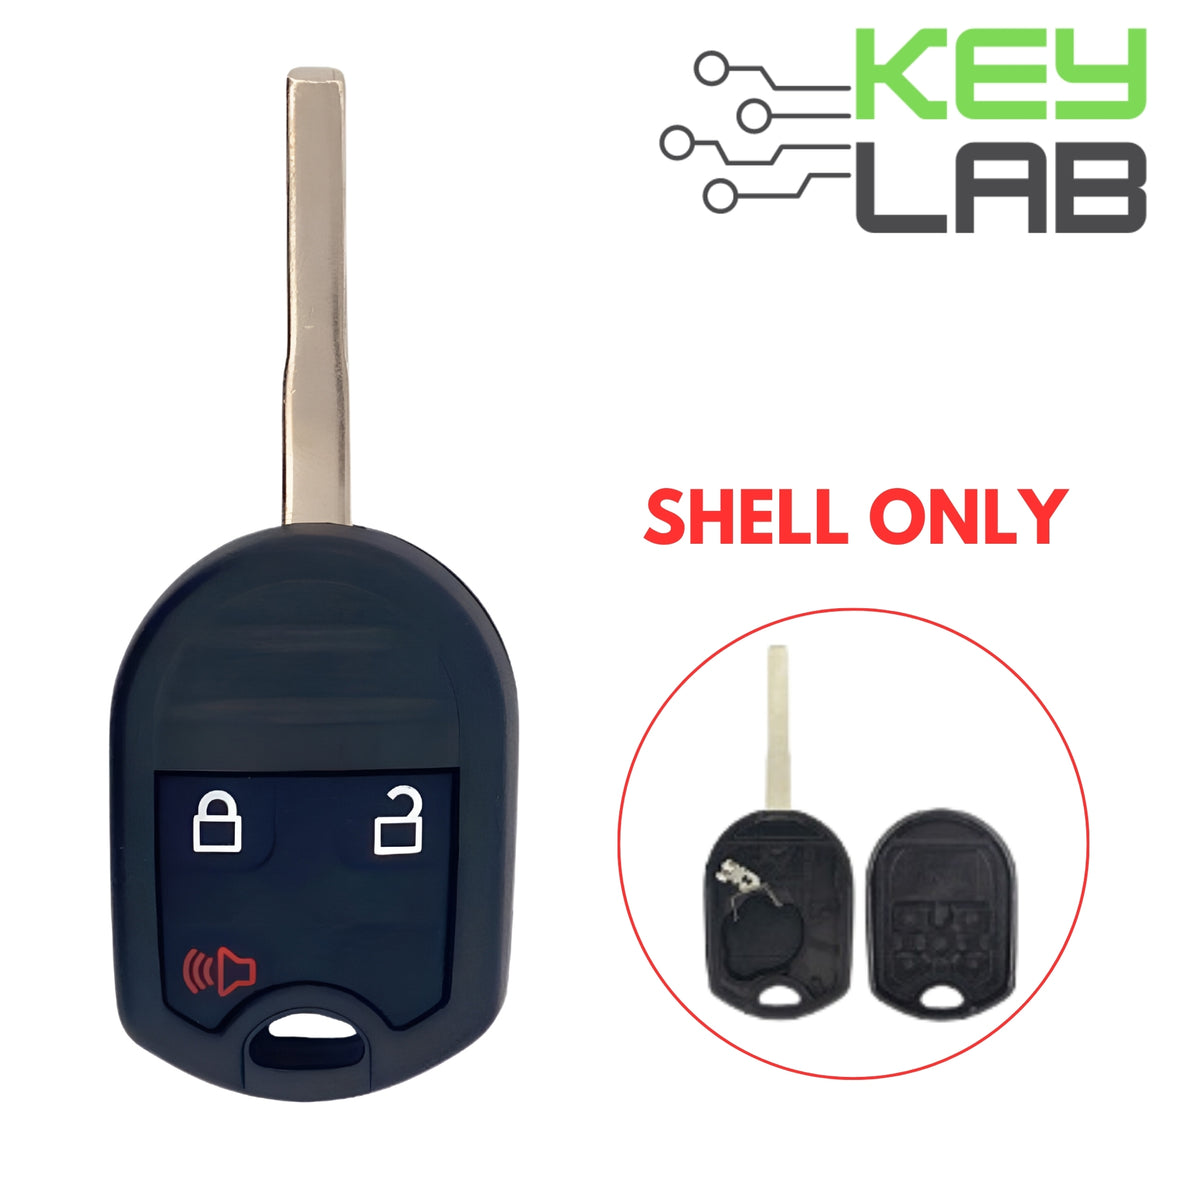 Ford 2011-2018 Remote Head Key SHELL for OUCD6000022 - Royal Key Supply